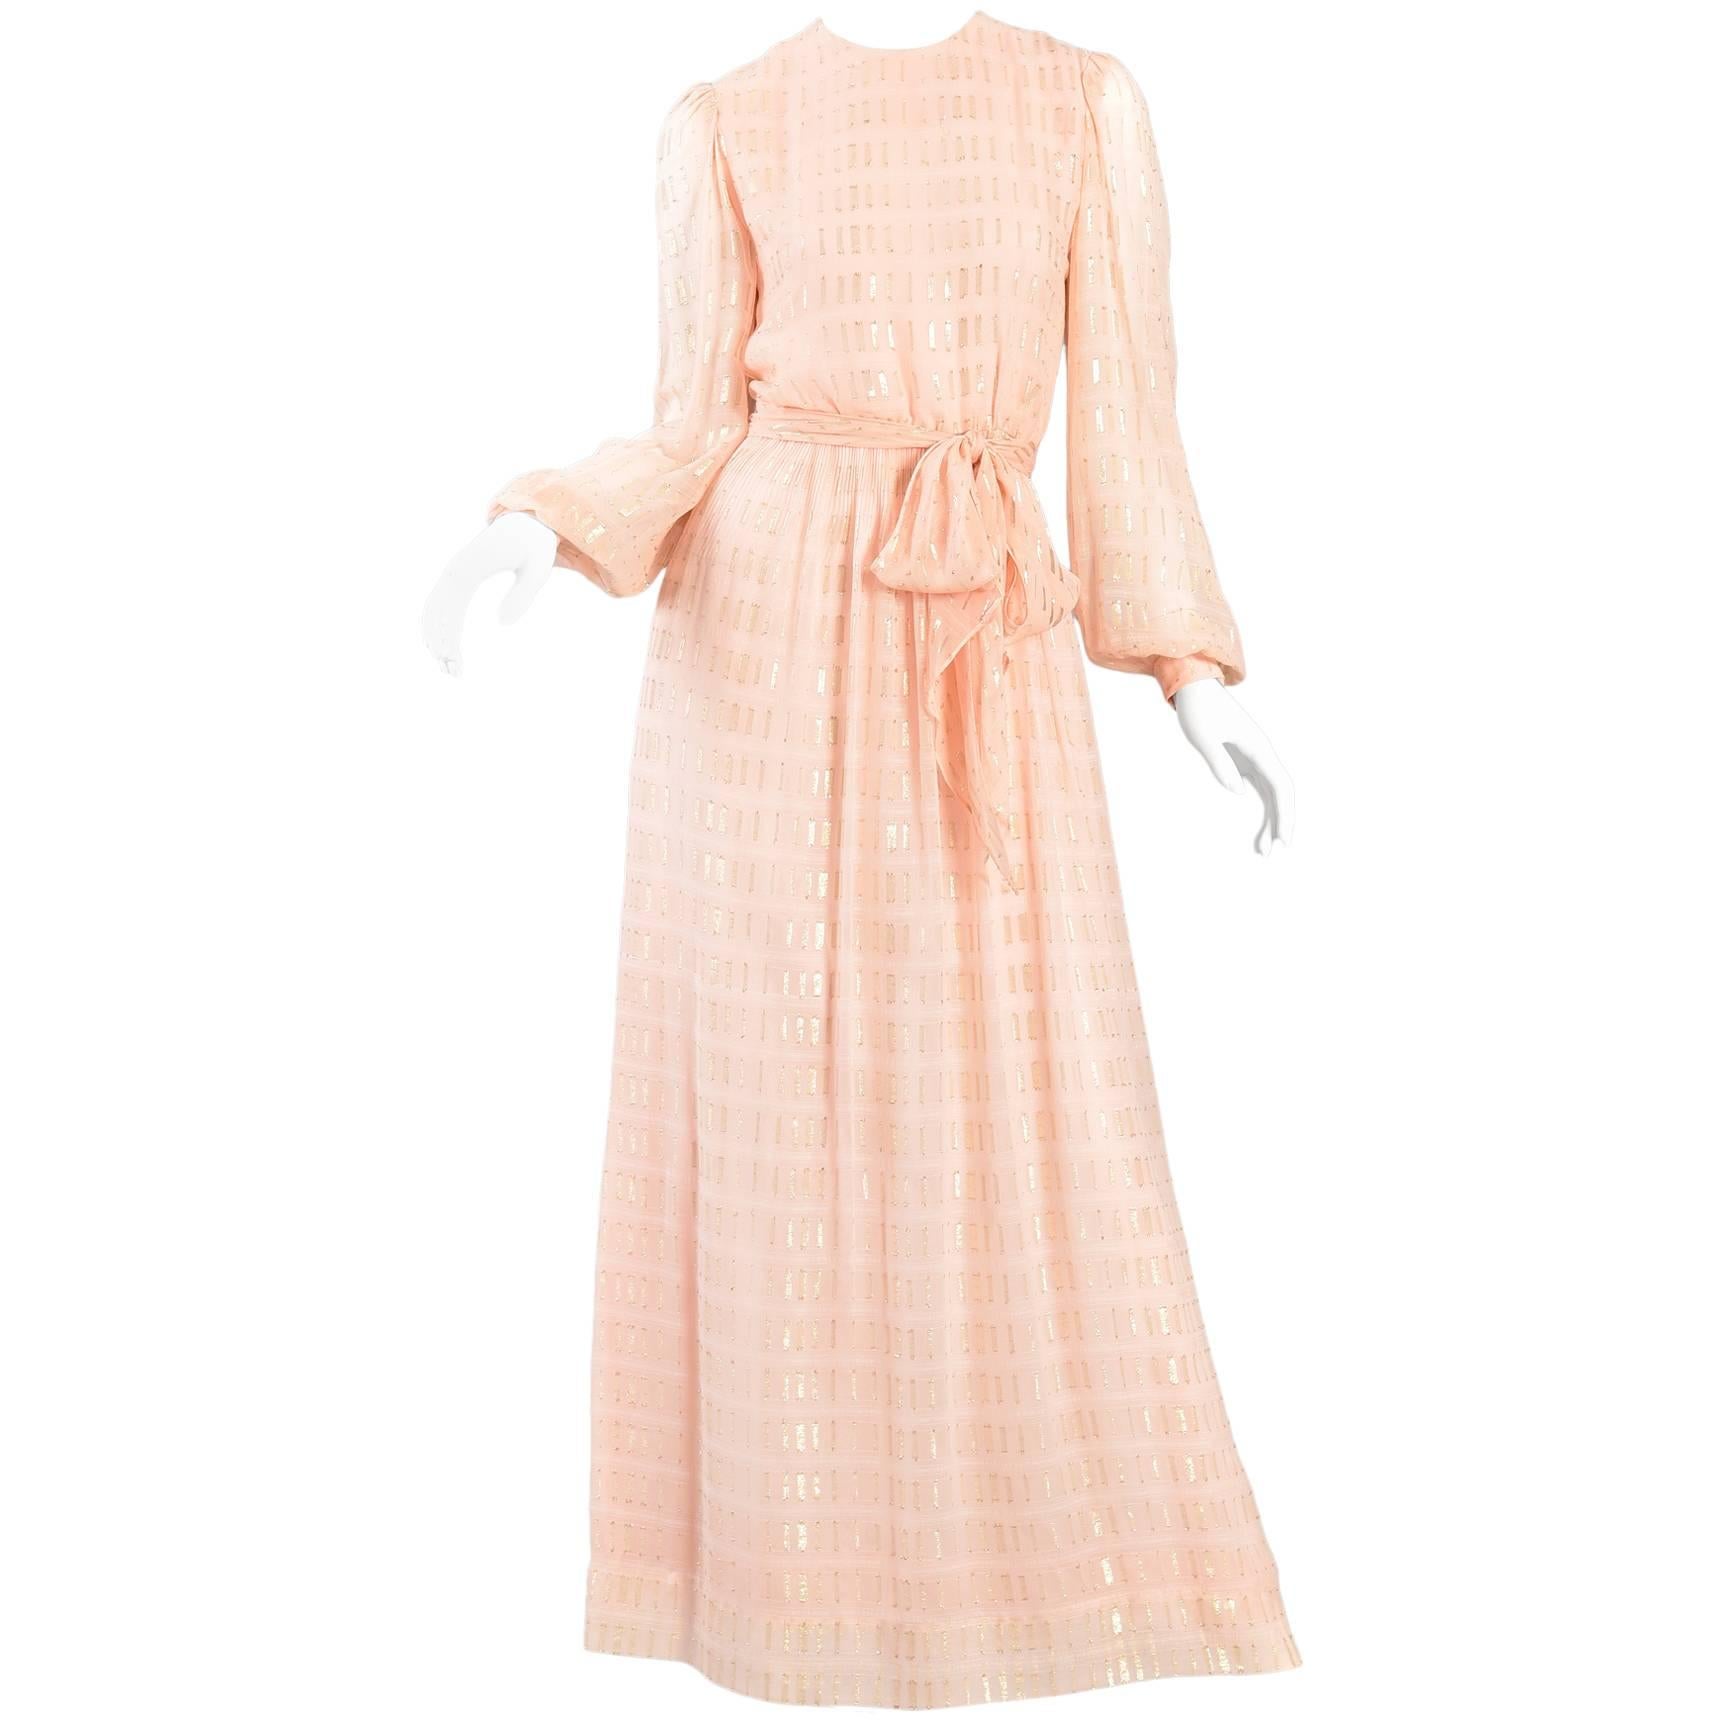 1960s Nat Kaplan Couture Peach Silk Dress with Gold Lurex Threads Throughout For Sale